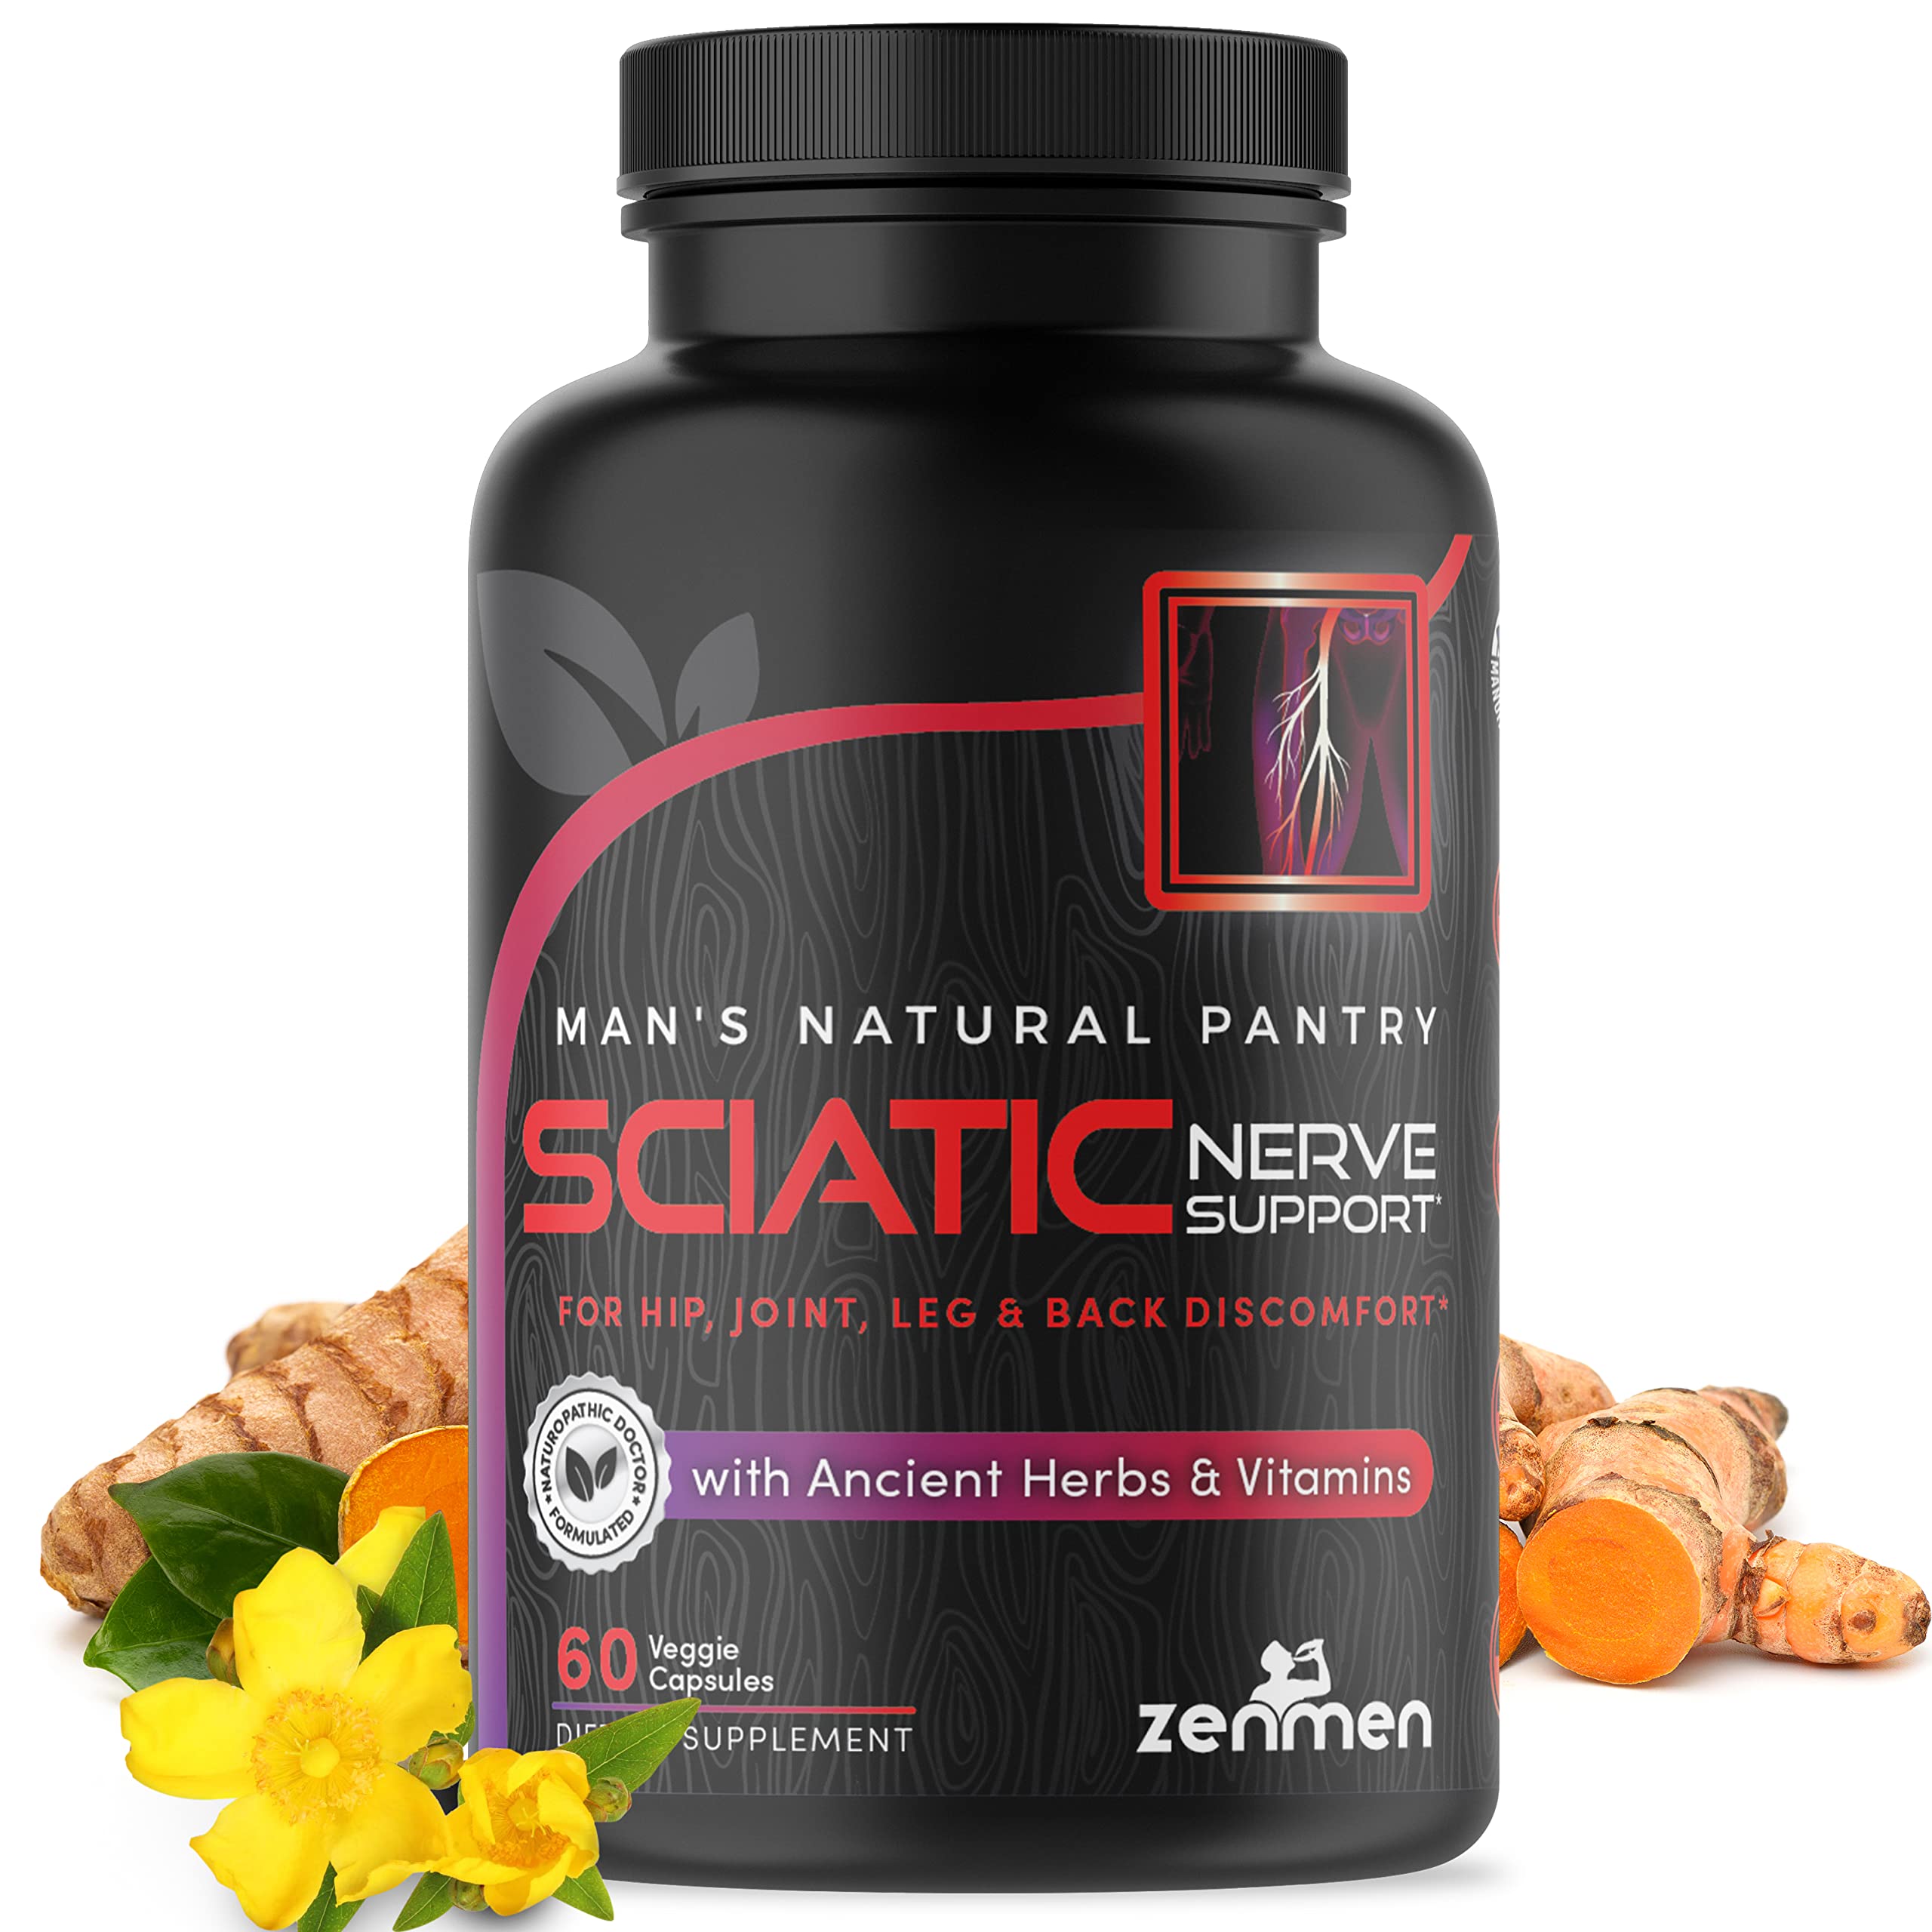 Sciatic Pain Relief - Sciatica Nerve Pain Relief - Sciatica Nerve Inflammation Reducer - 100% Herbal and Natural Supplement